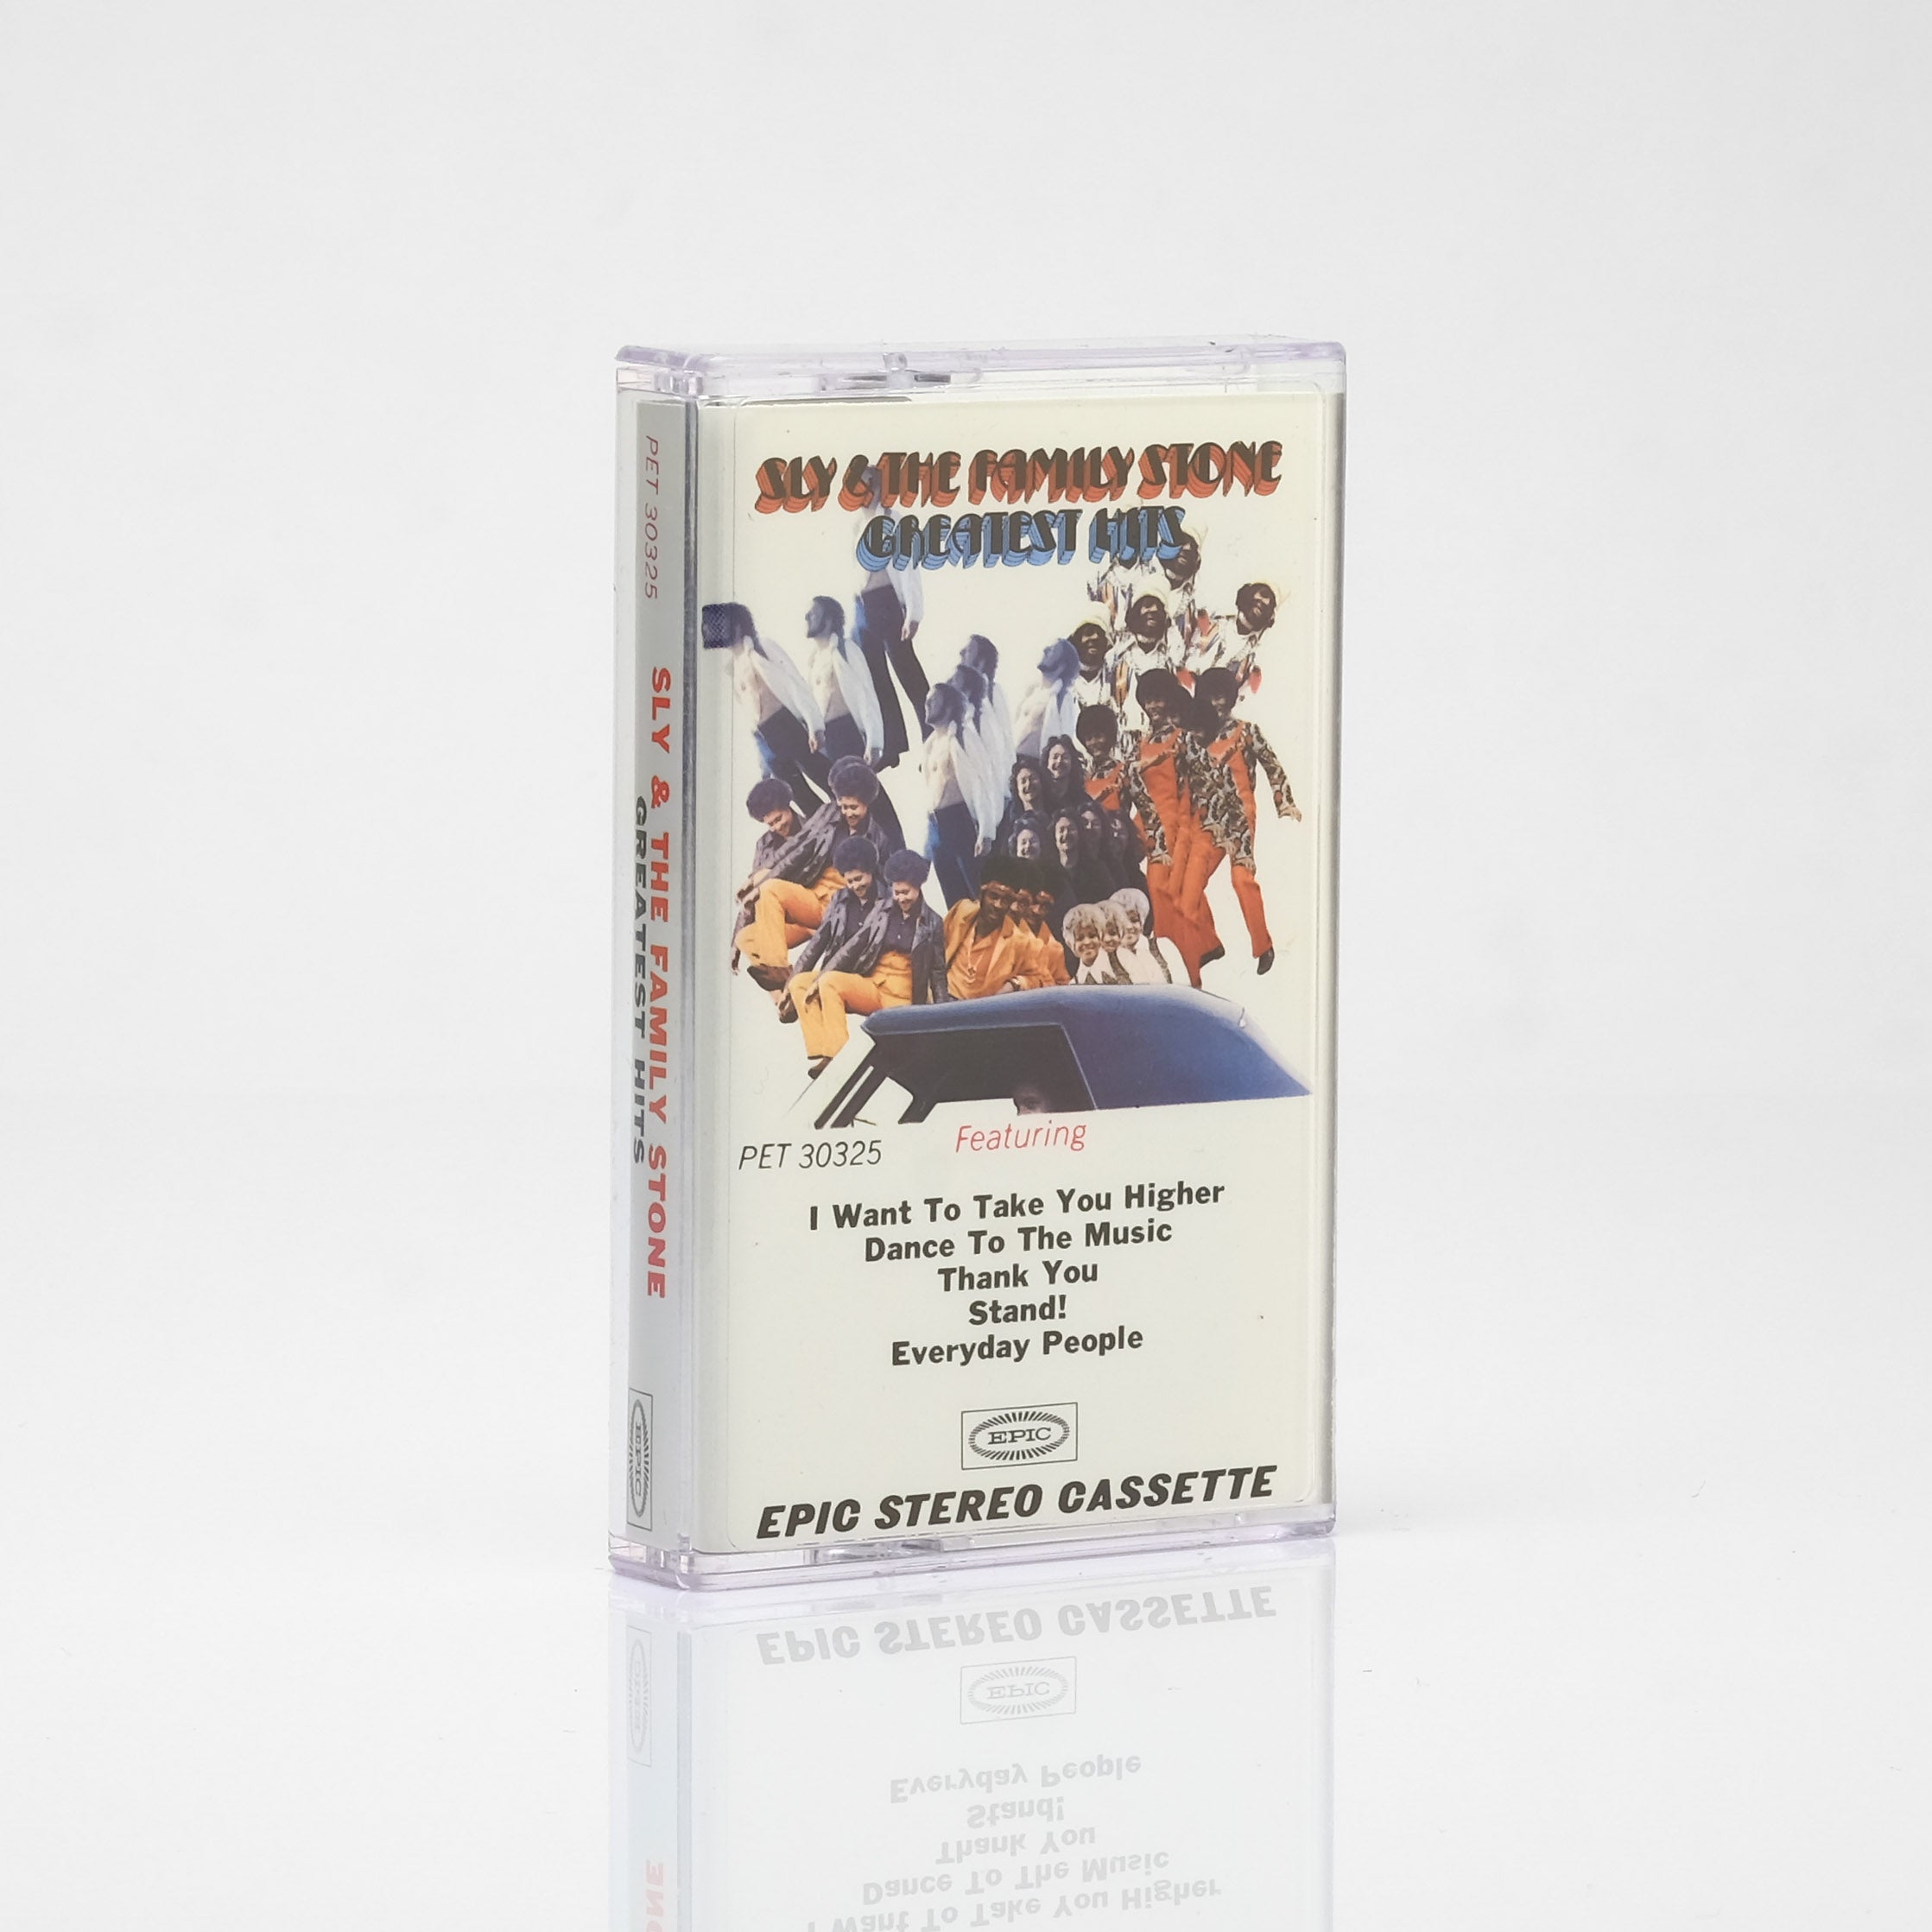 Sly & The Family Stone - Greatest Hits Cassette Tape